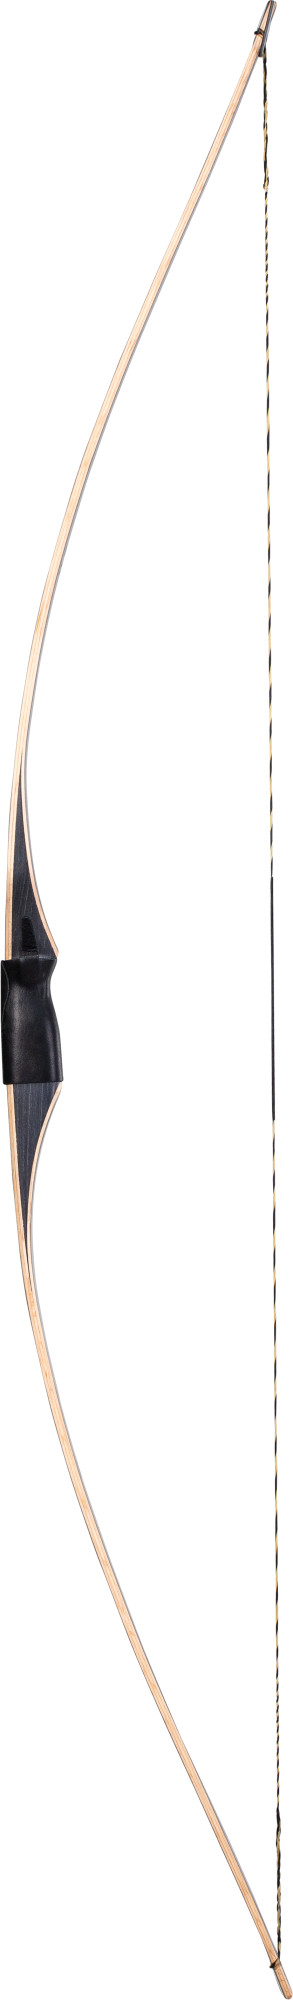 Bear Archery Montana Longbow - Traditional Bow for Adults